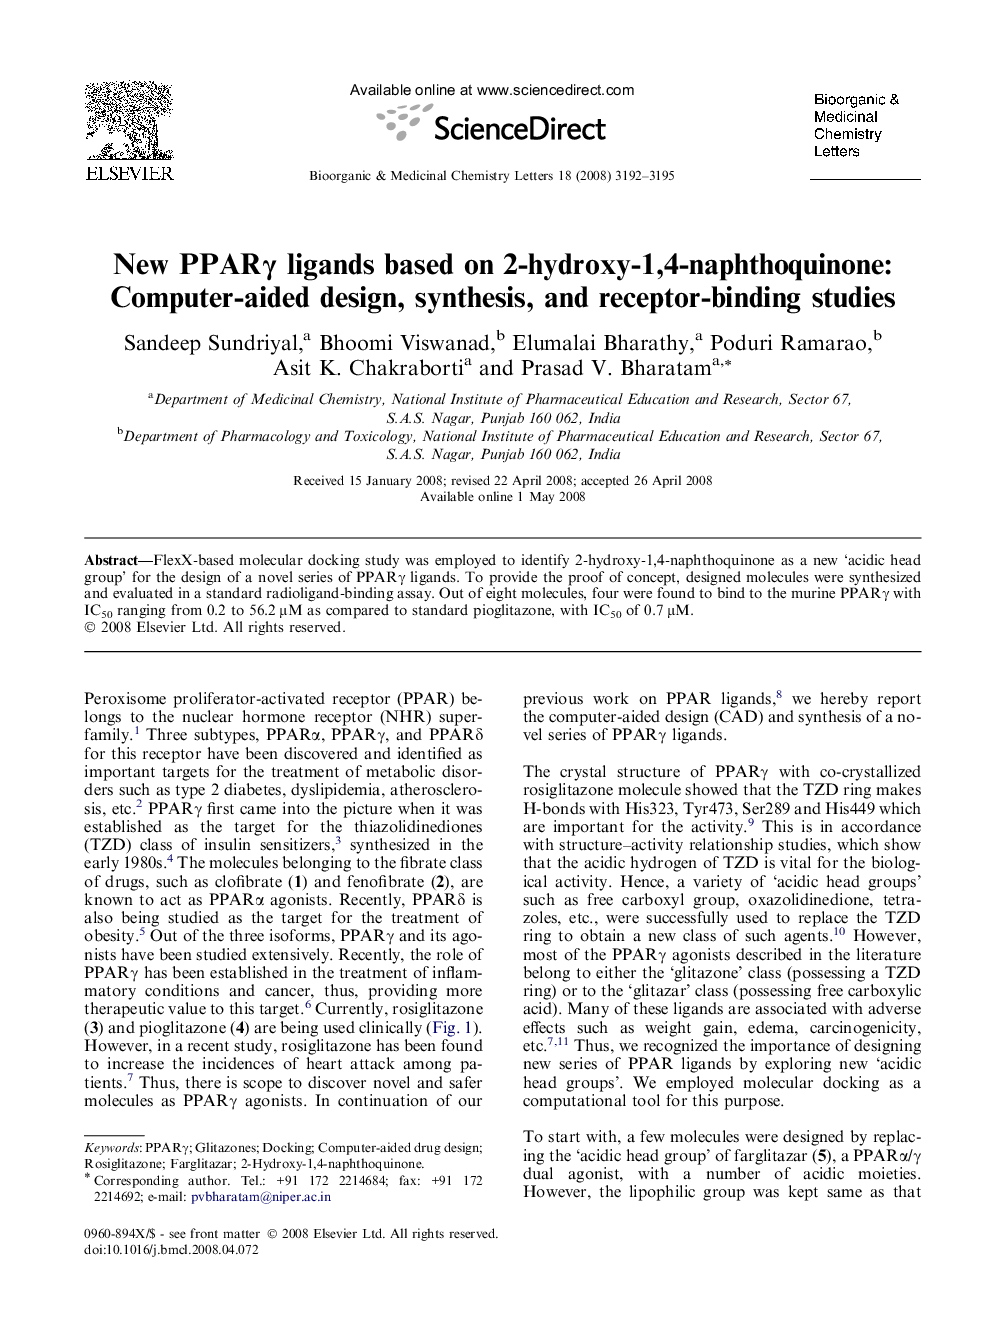 New PPARγ ligands based on 2-hydroxy-1,4-naphthoquinone: Computer-aided design, synthesis, and receptor-binding studies